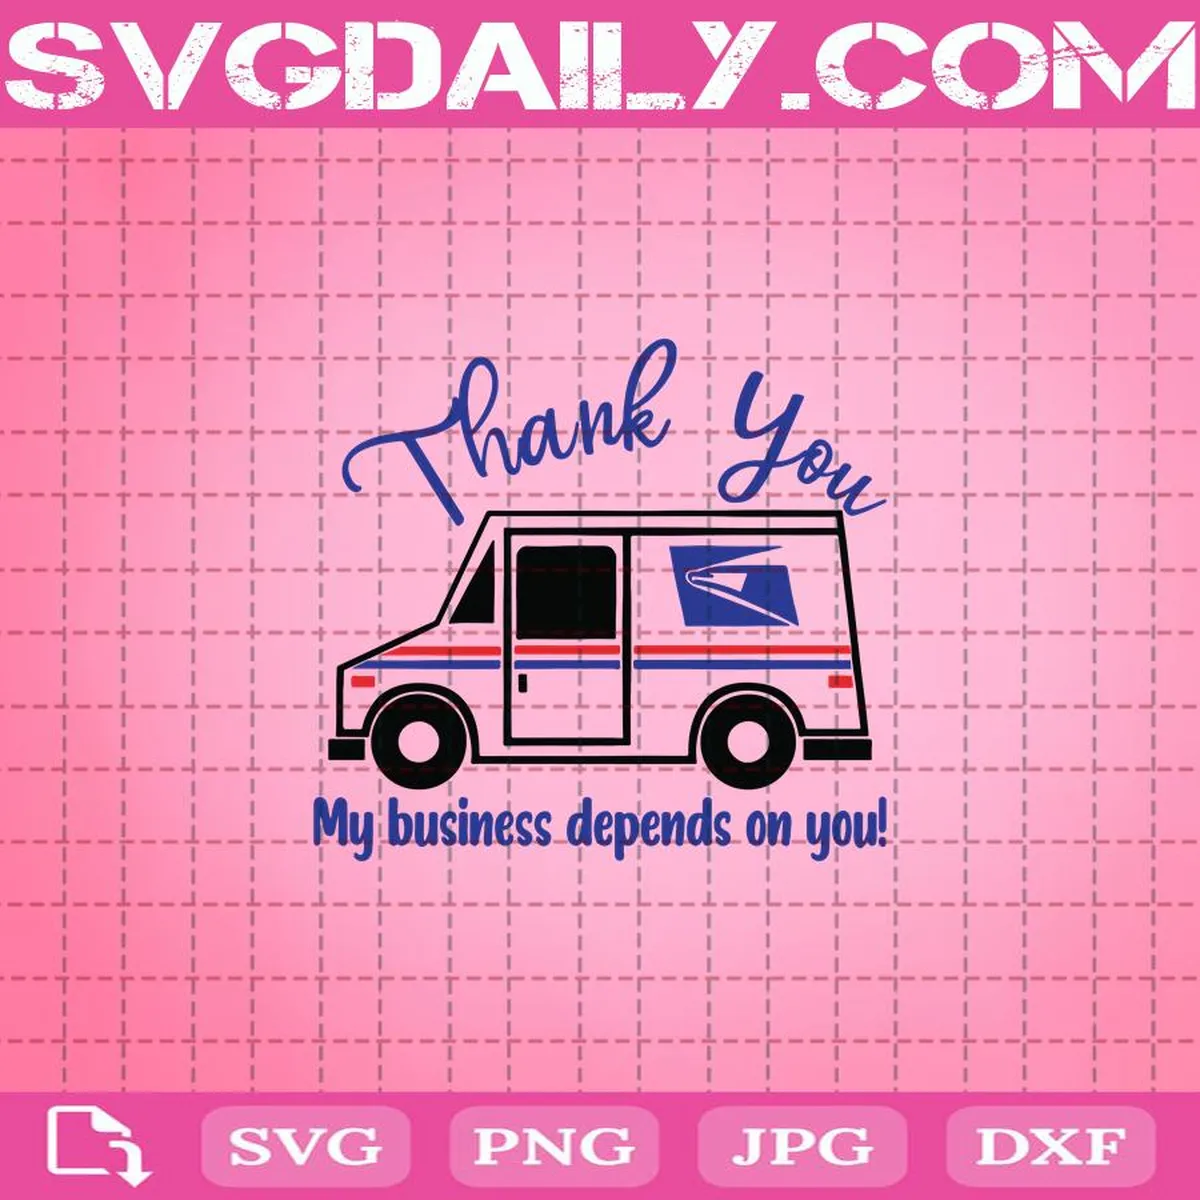 USPS Mail Carrier Post Office Postal Truck Thank You Svg, USPS Svg, Thank You Svg, Truck Svg, Usps Mail Svg, Post Truck Svg, Mail Truck Svg